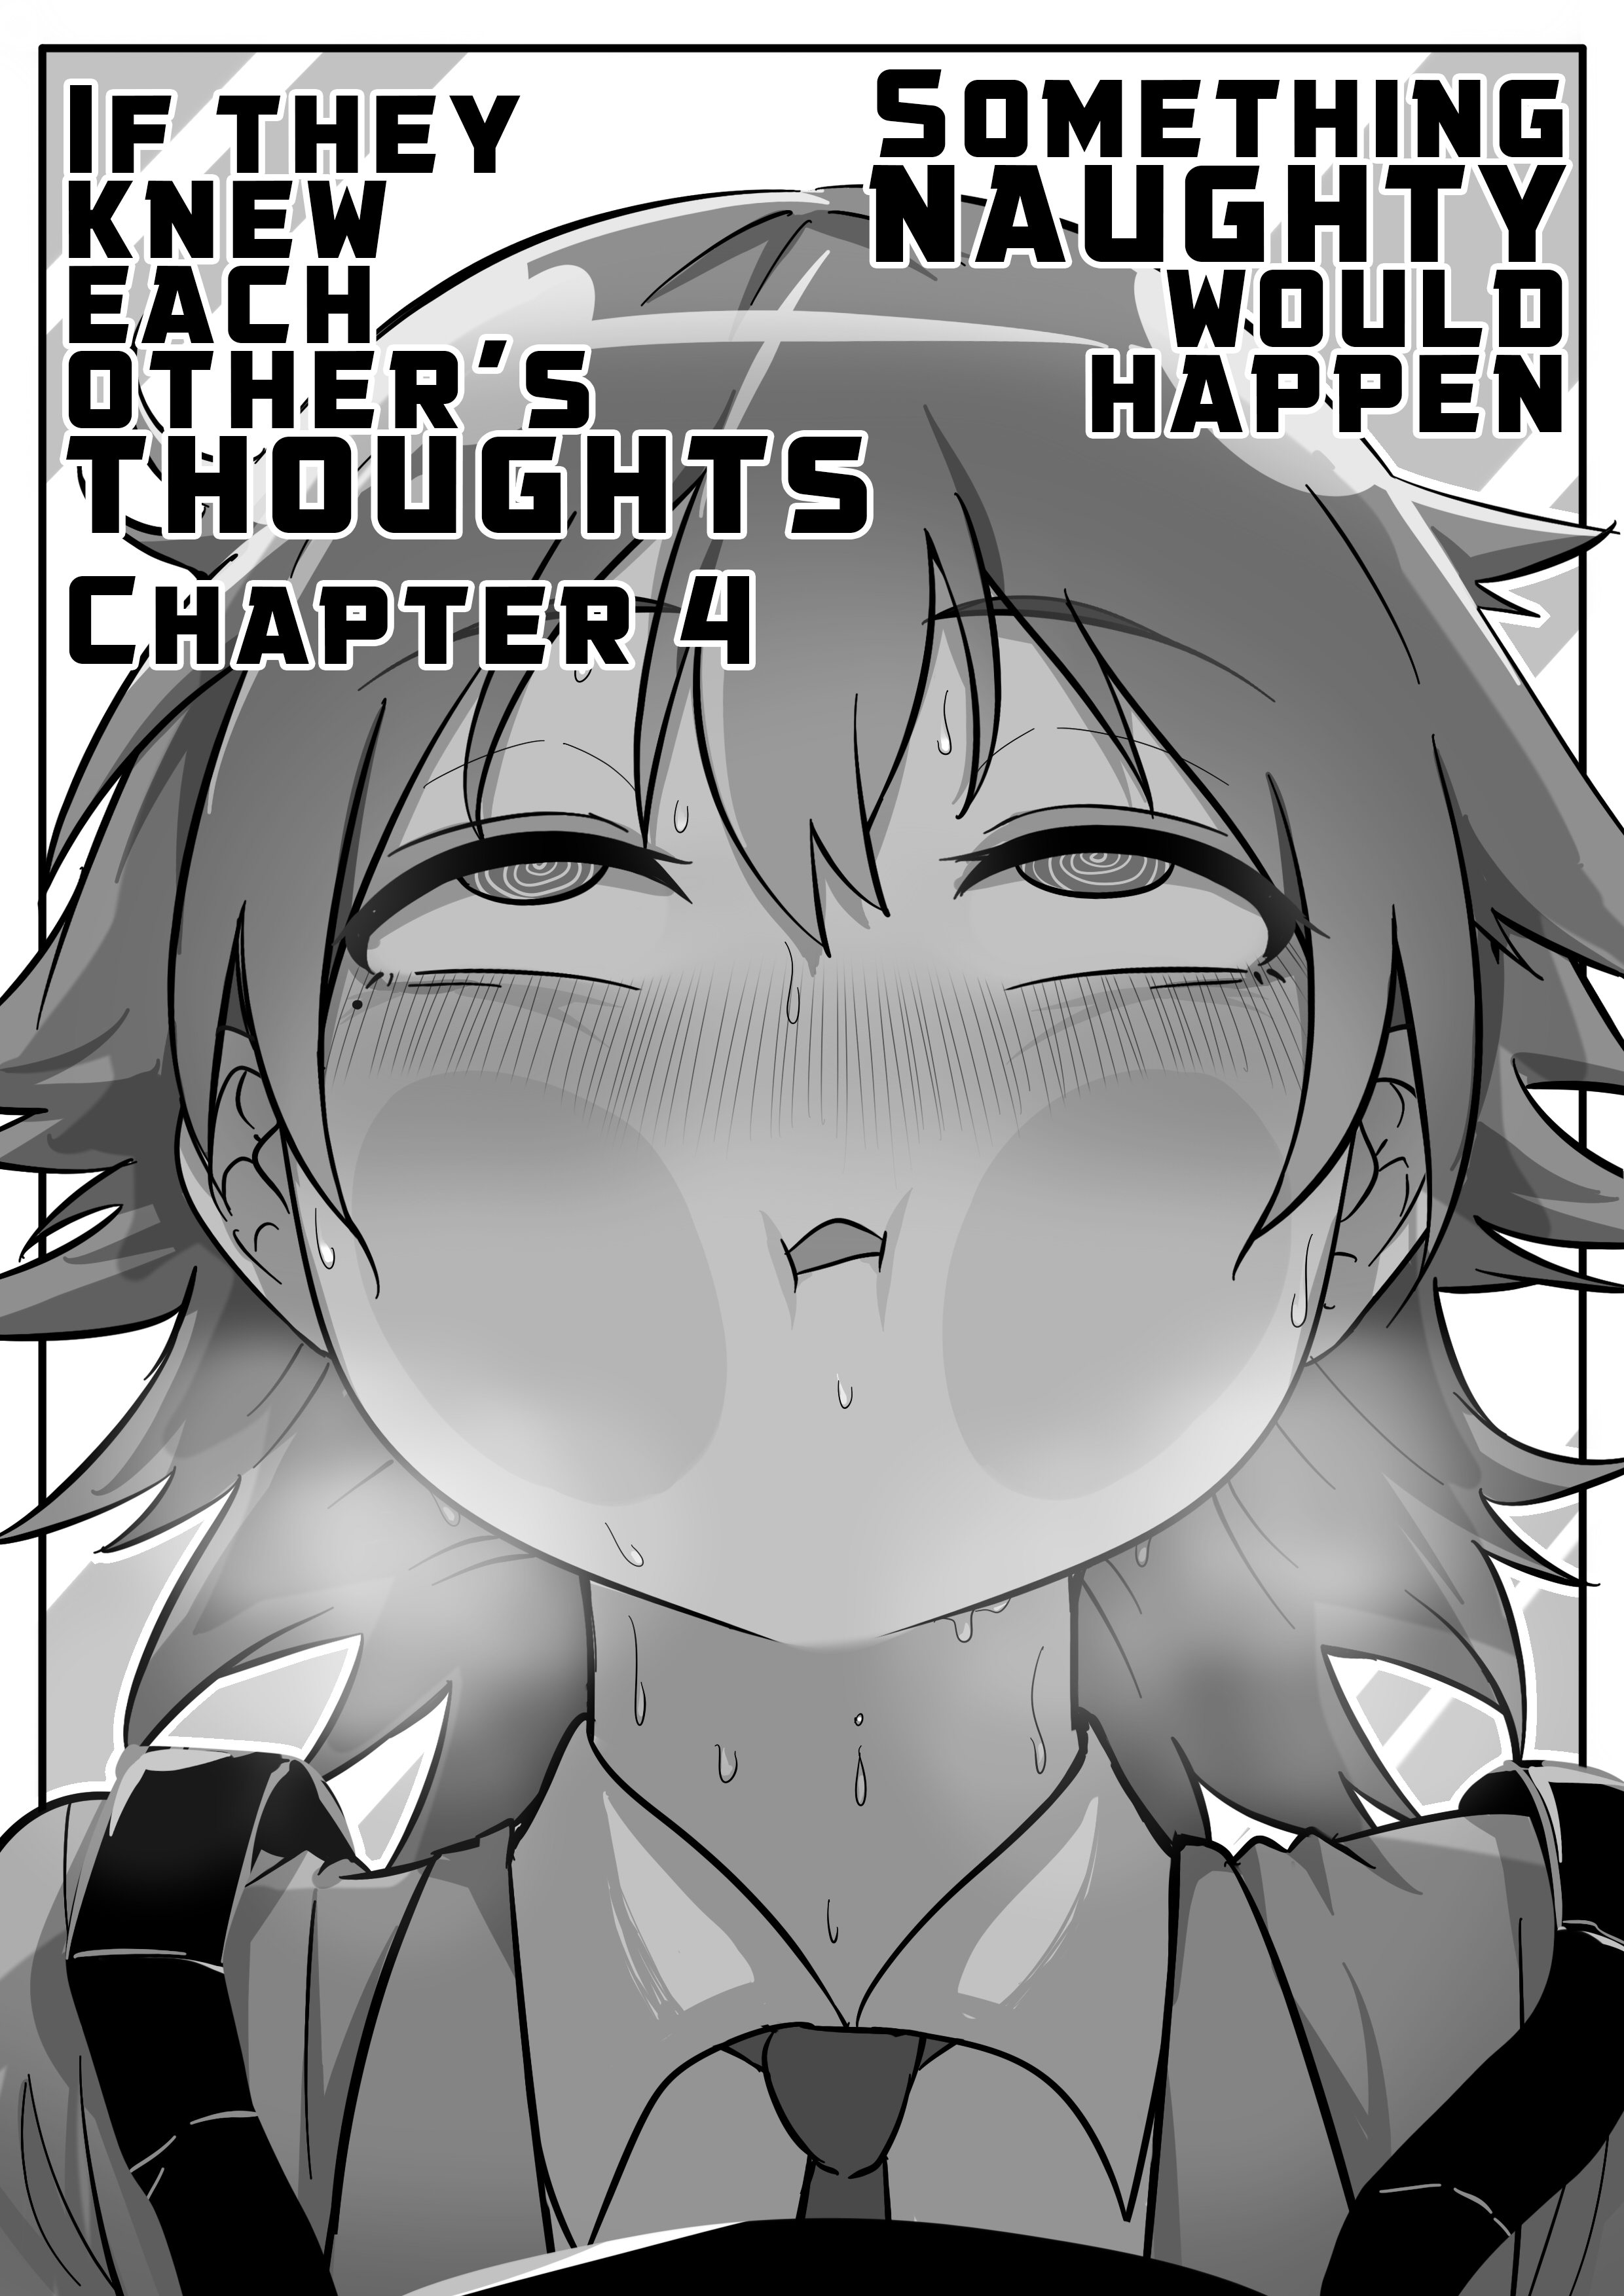 Something Naughty Would Happen If They Knew Each Other's Thoughts - chapter 4 - #2